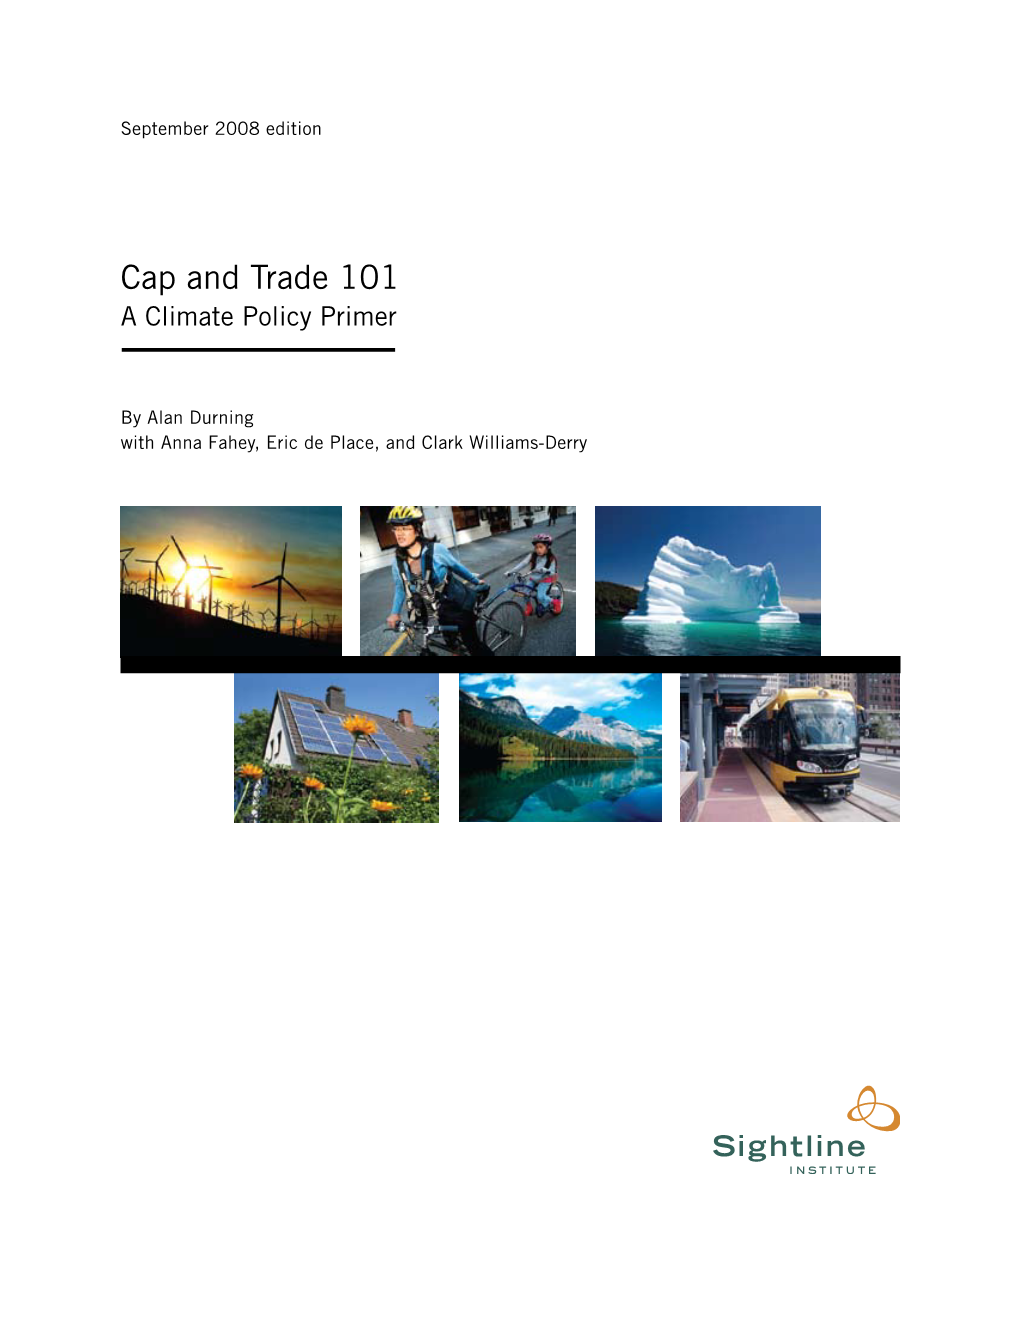 Cap and Trade 101 a Climate Policy Primer